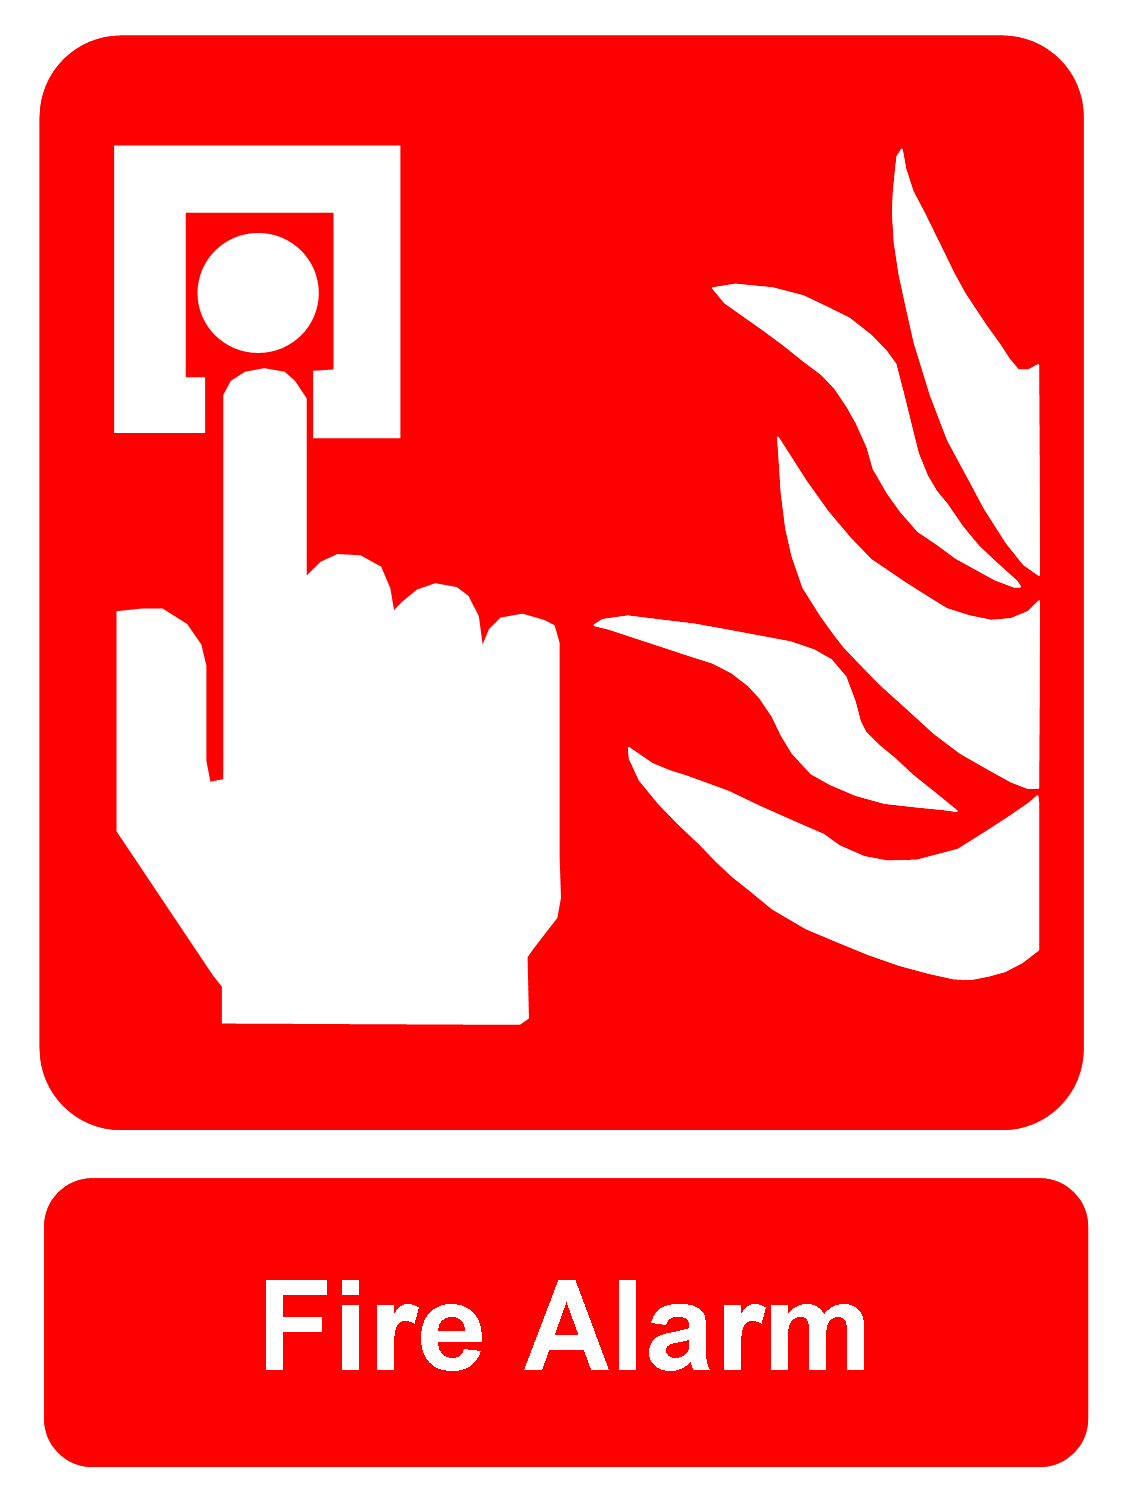 fire blanket clipart - photo #40